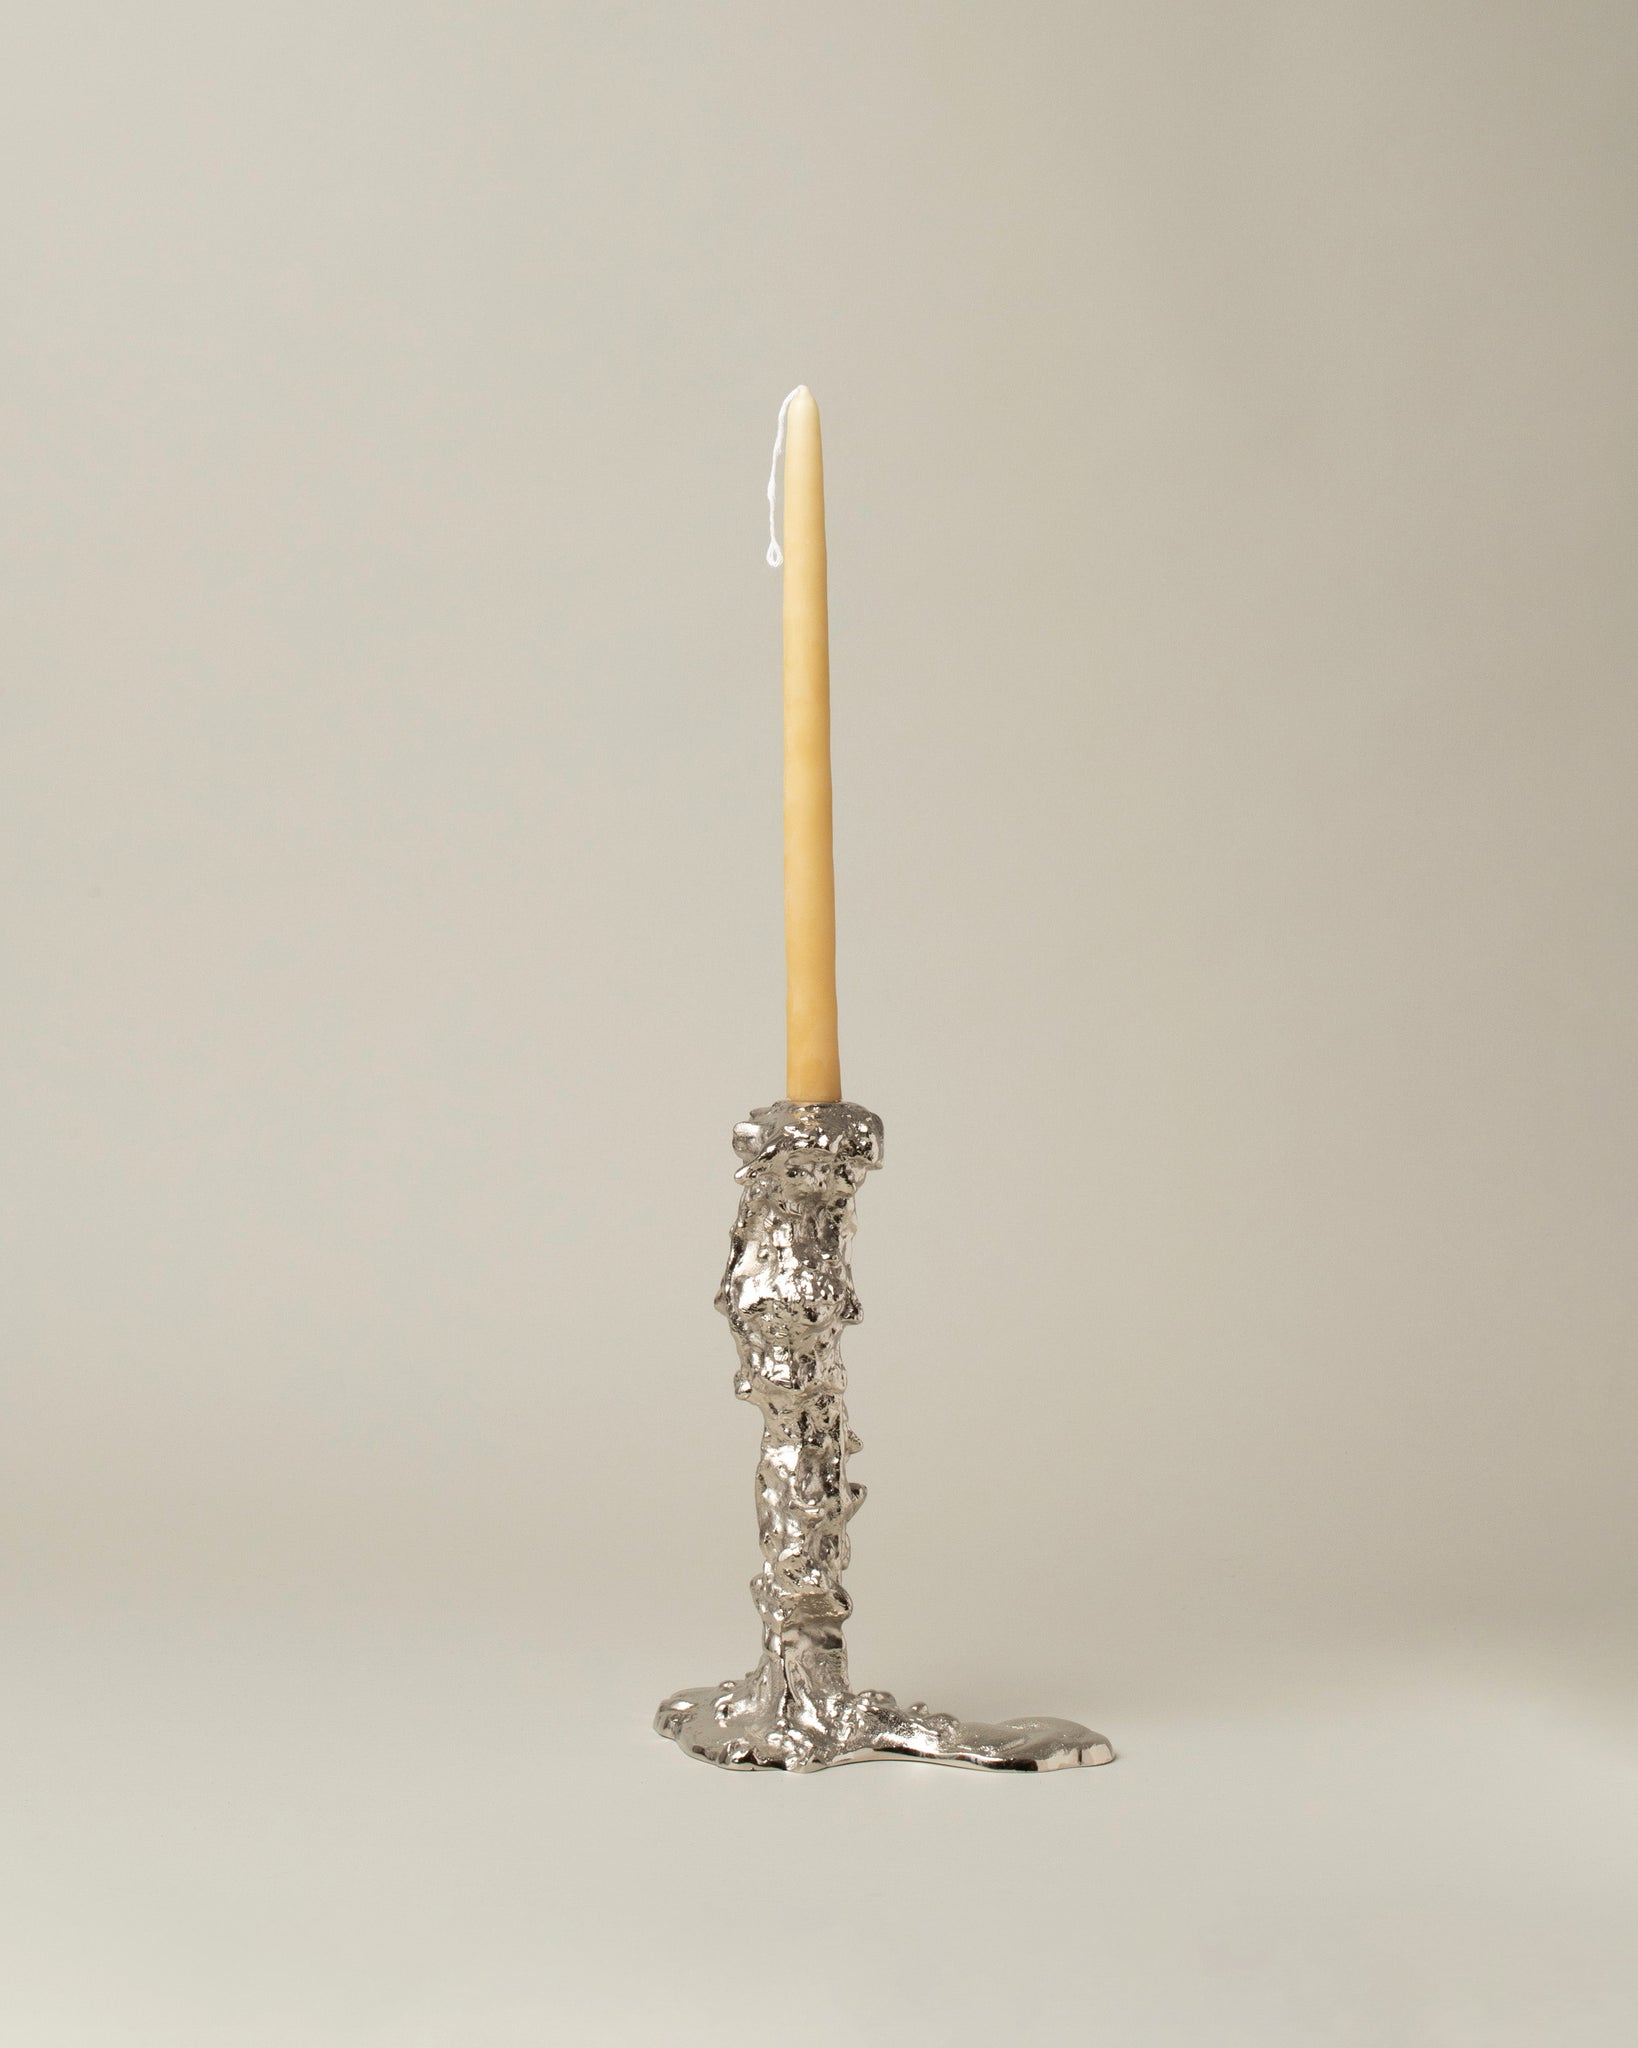 POLSPOTTEN Collection candlestick with silver treatment on a neutral-light background.